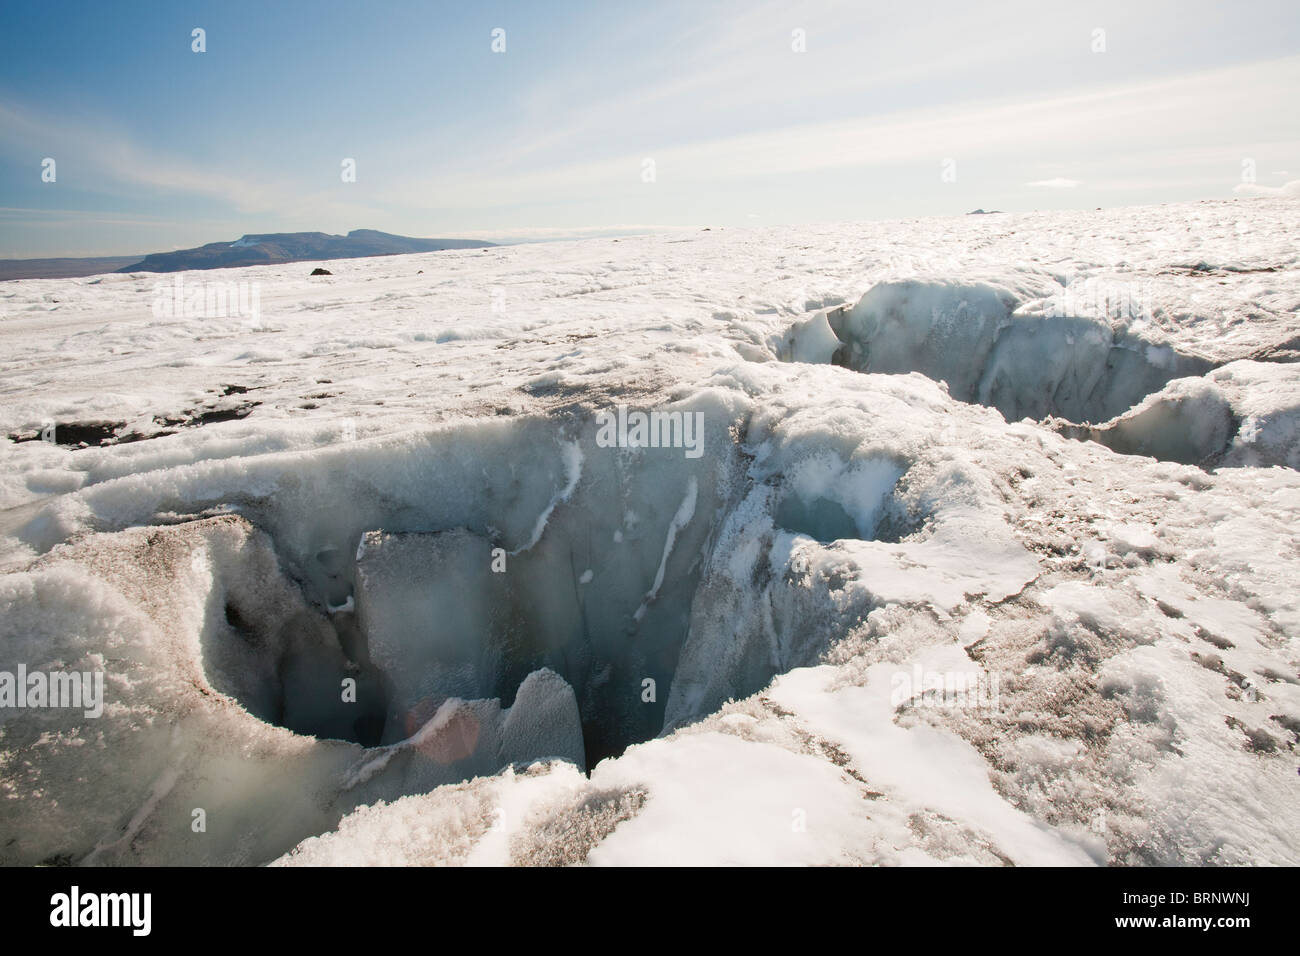 A moulin or meltwater sink hole on the Langjokull glacier which is retreating rapidly due to climate change. Stock Photo